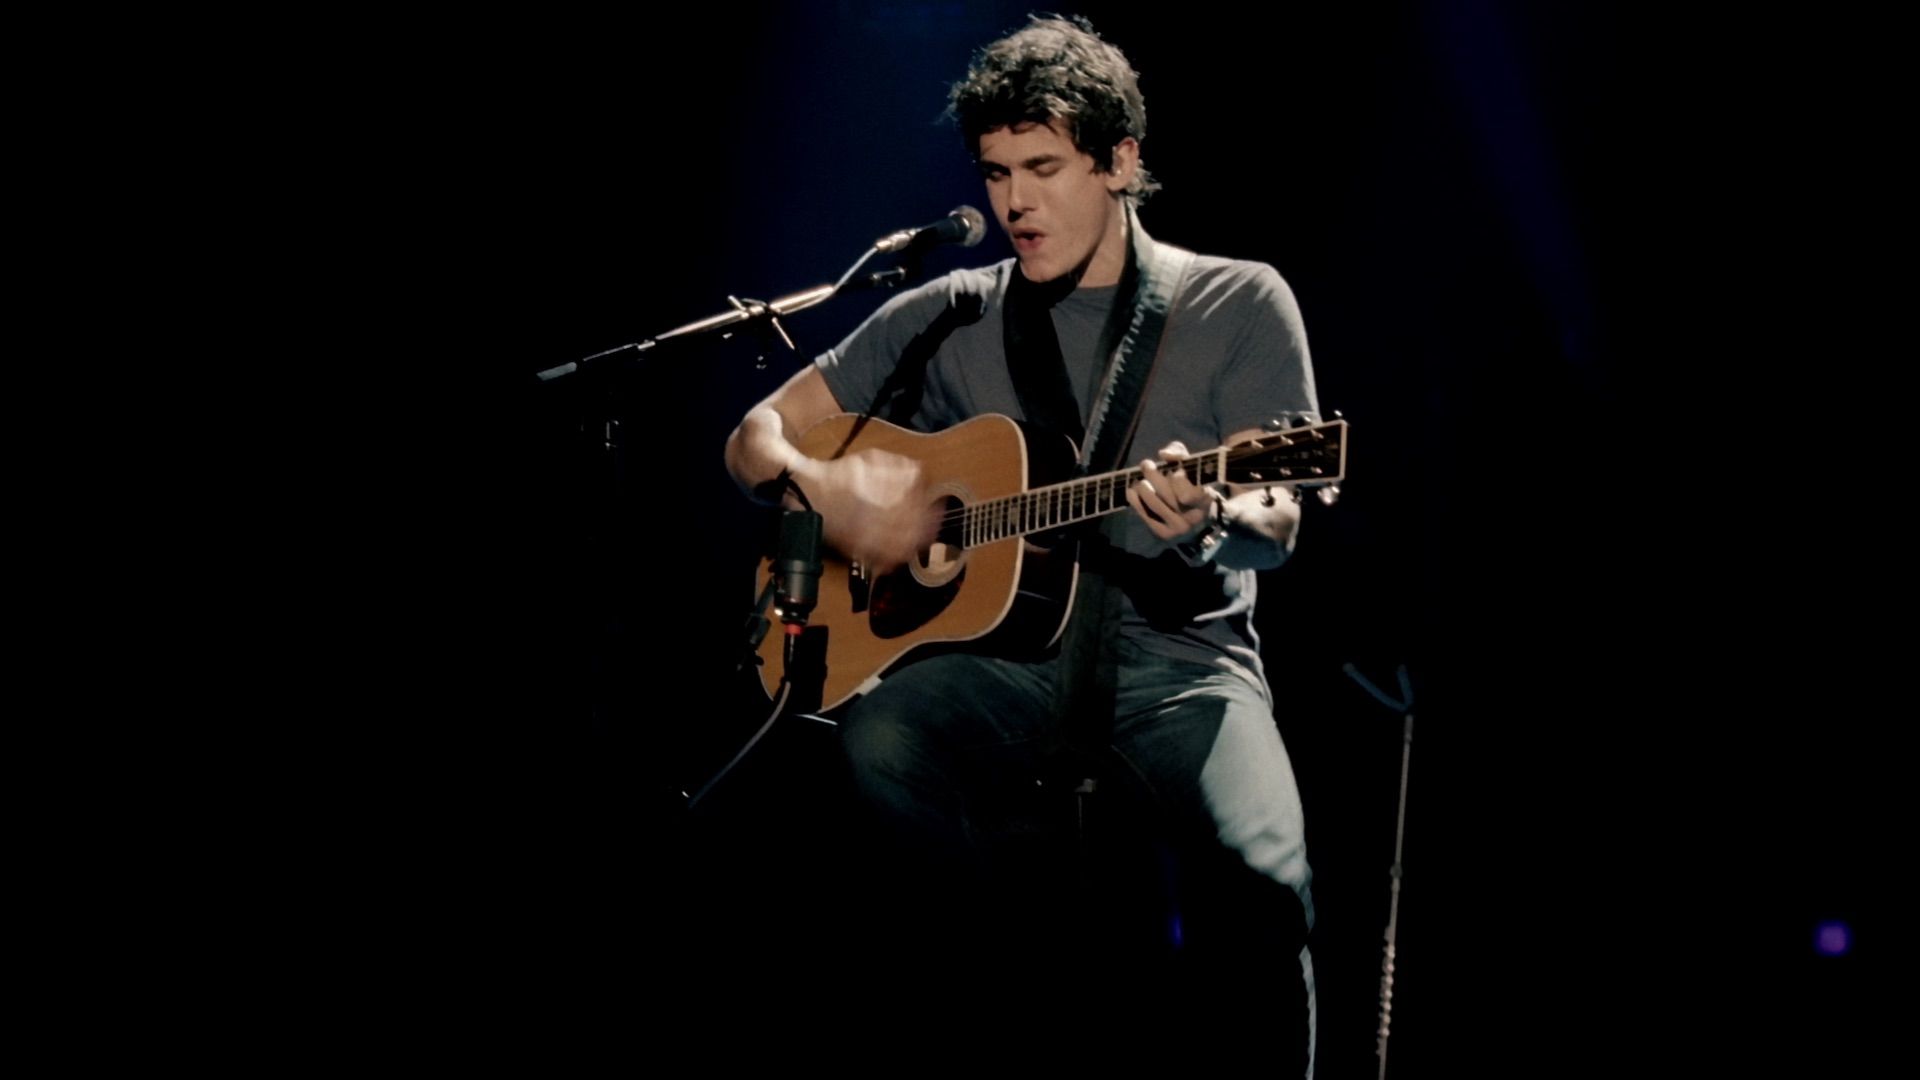 Where the Light Is: John Mayer Live in Los Angeles Backdrop